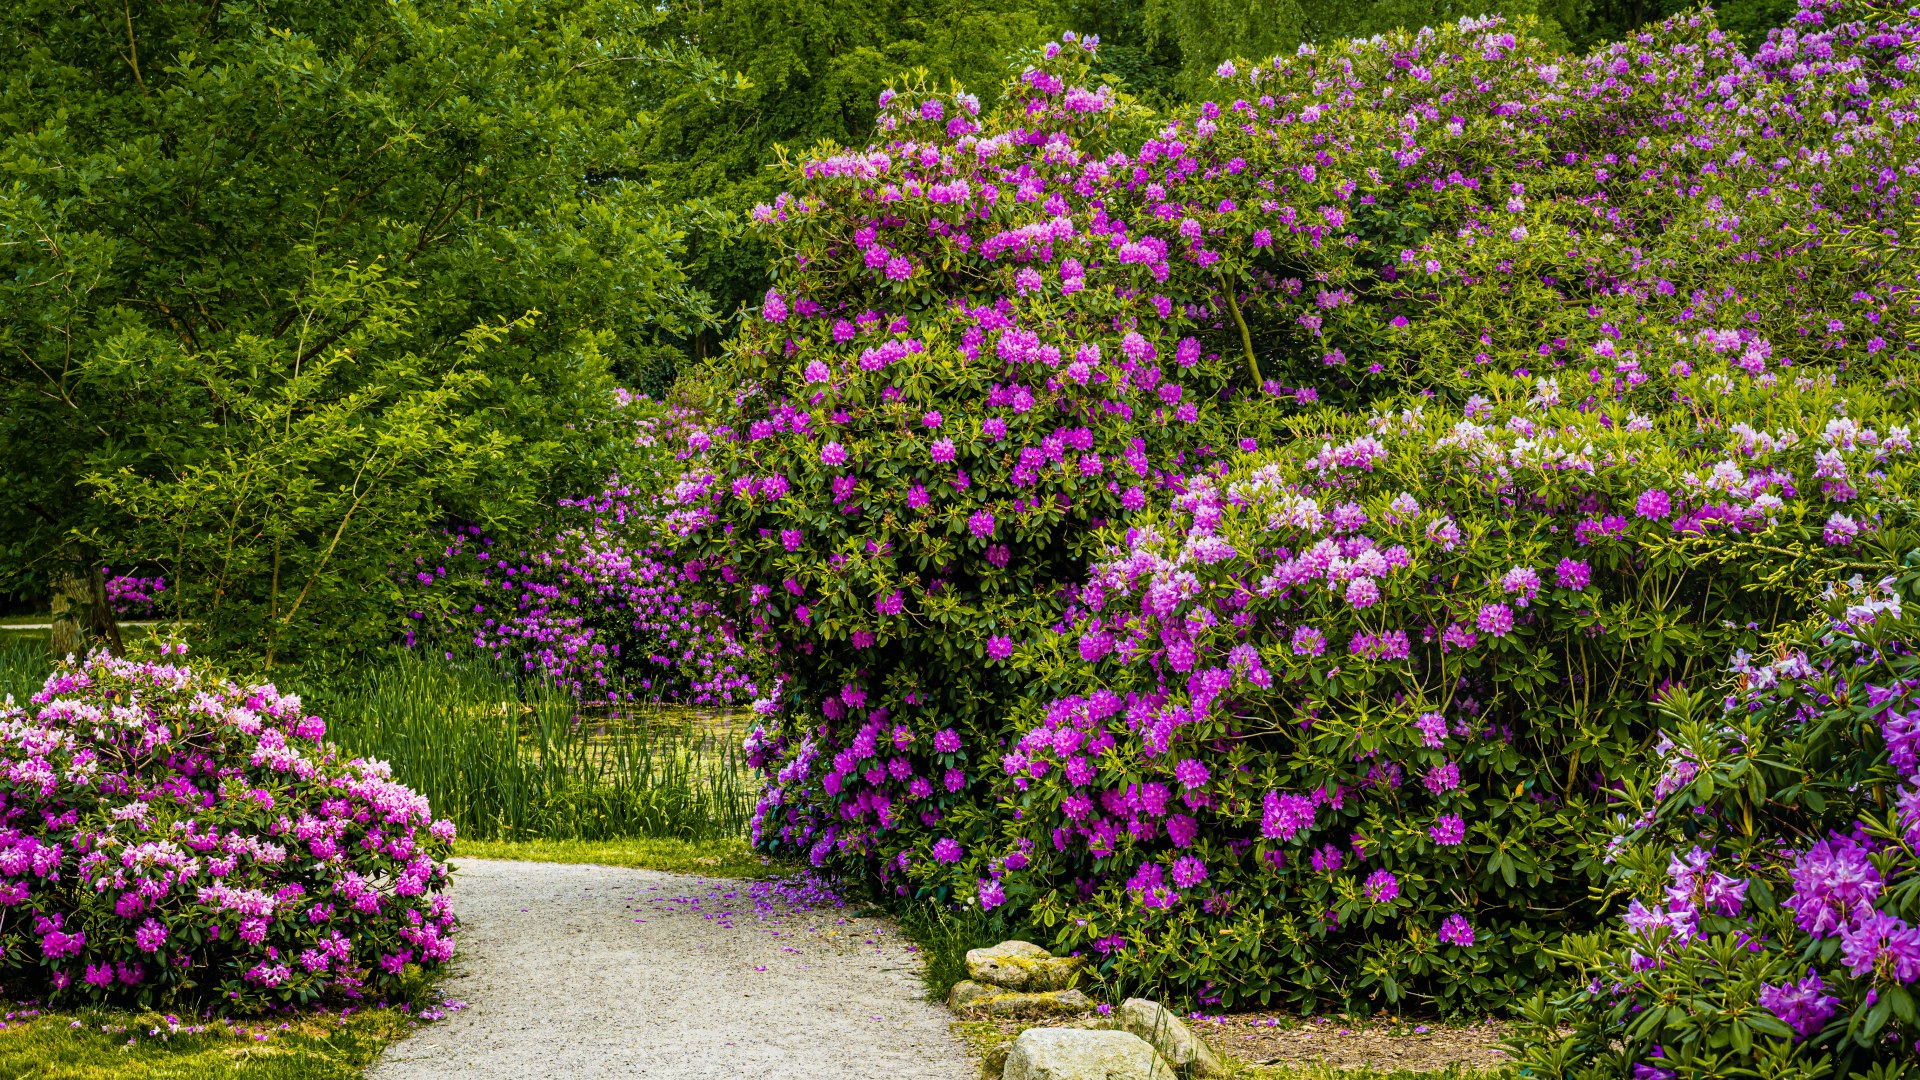 Over 1,000 rhododendrons were replanted during the park restoration, © TMV/Tiemann